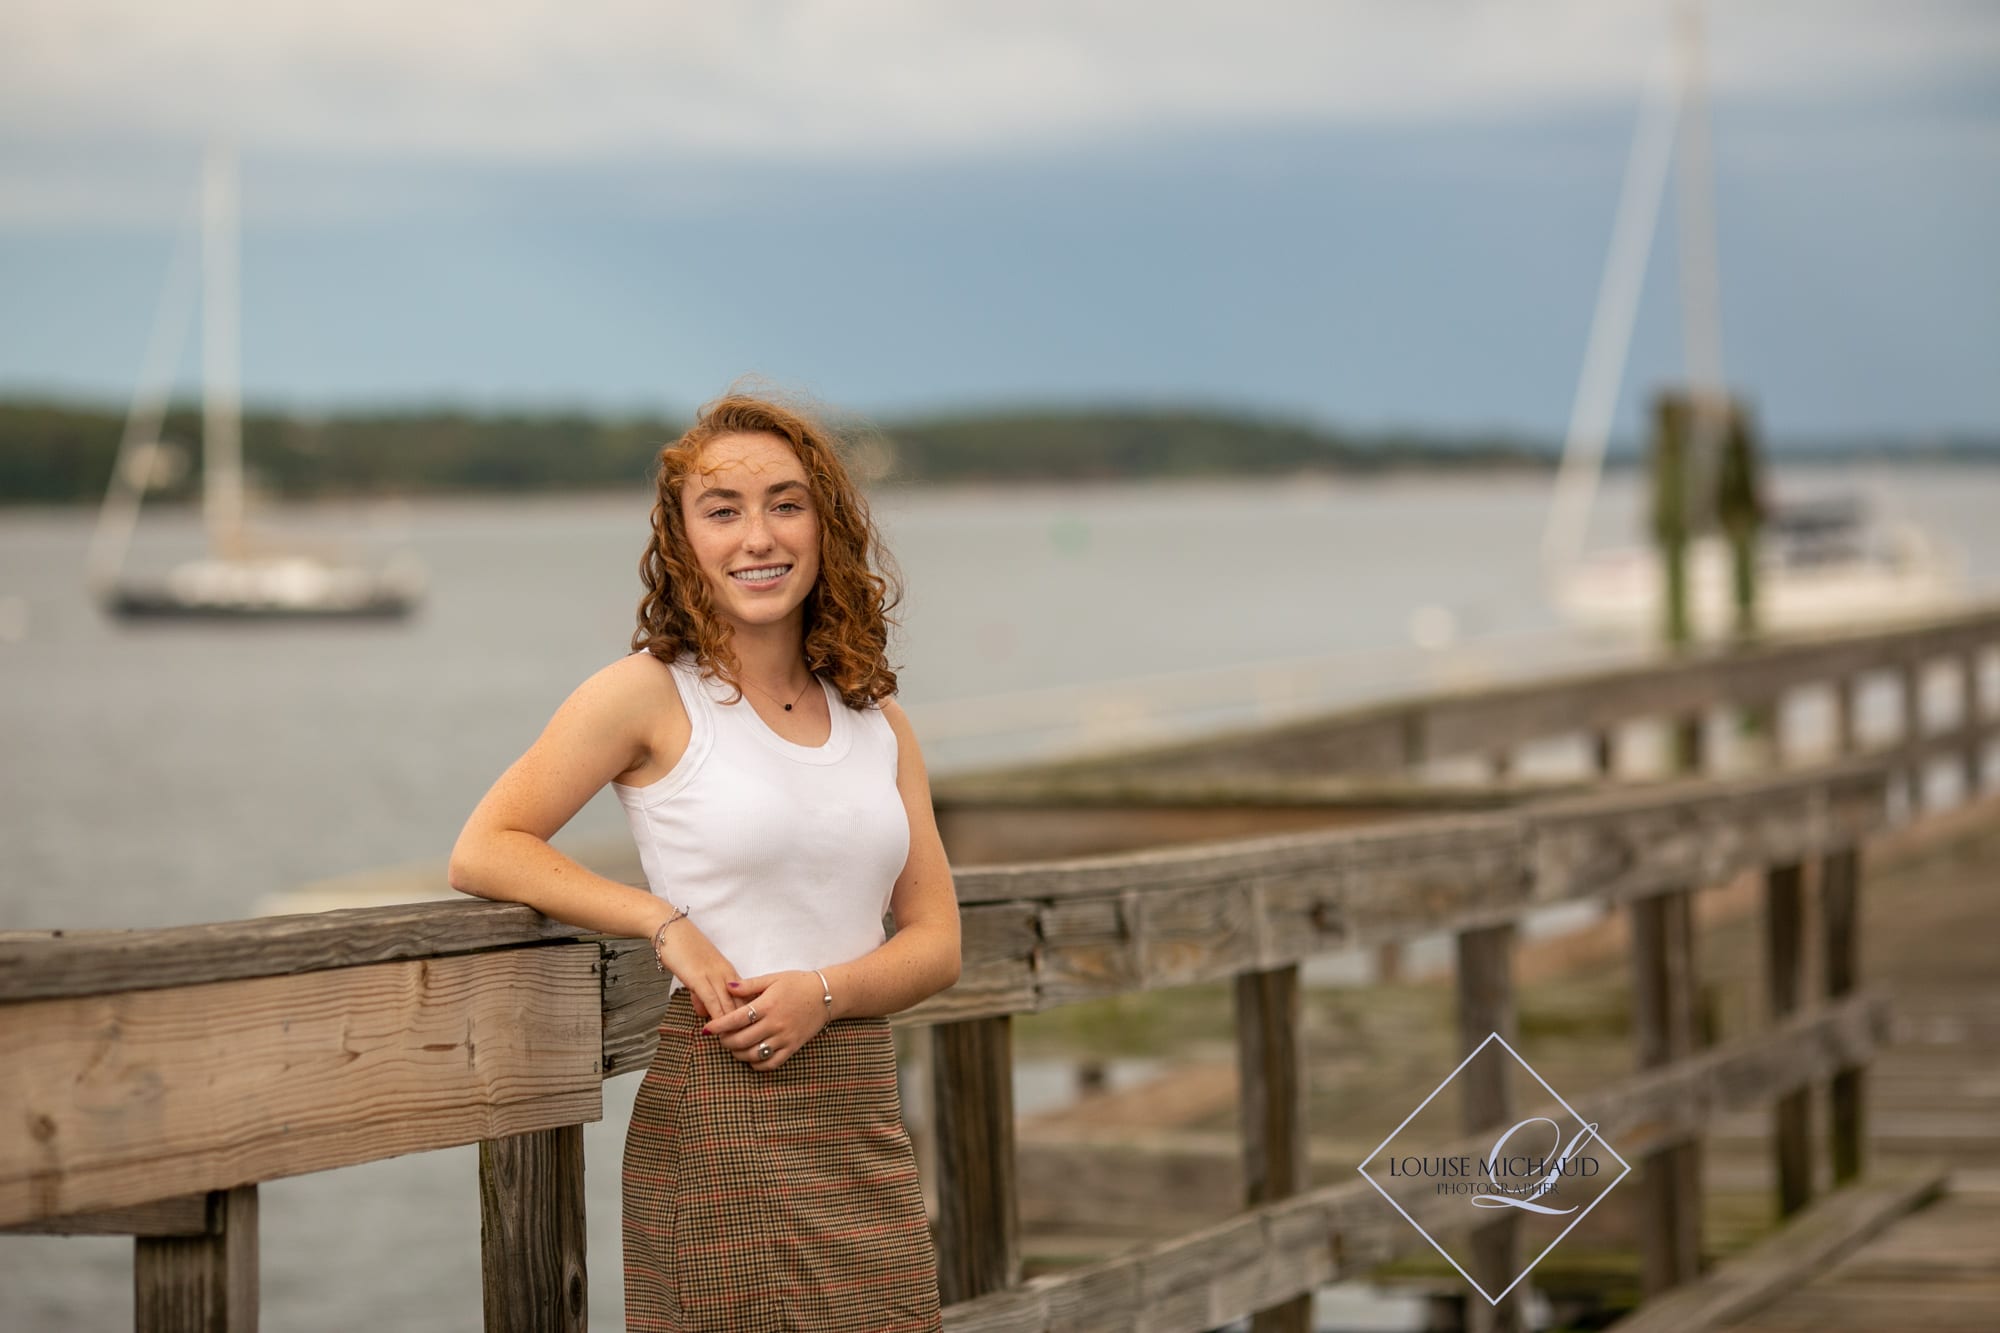 High School Senior portrait. Using natural light in a fashion inspired style. Lighthouse in background. Hair blowing in the wind on a dock by the sea.